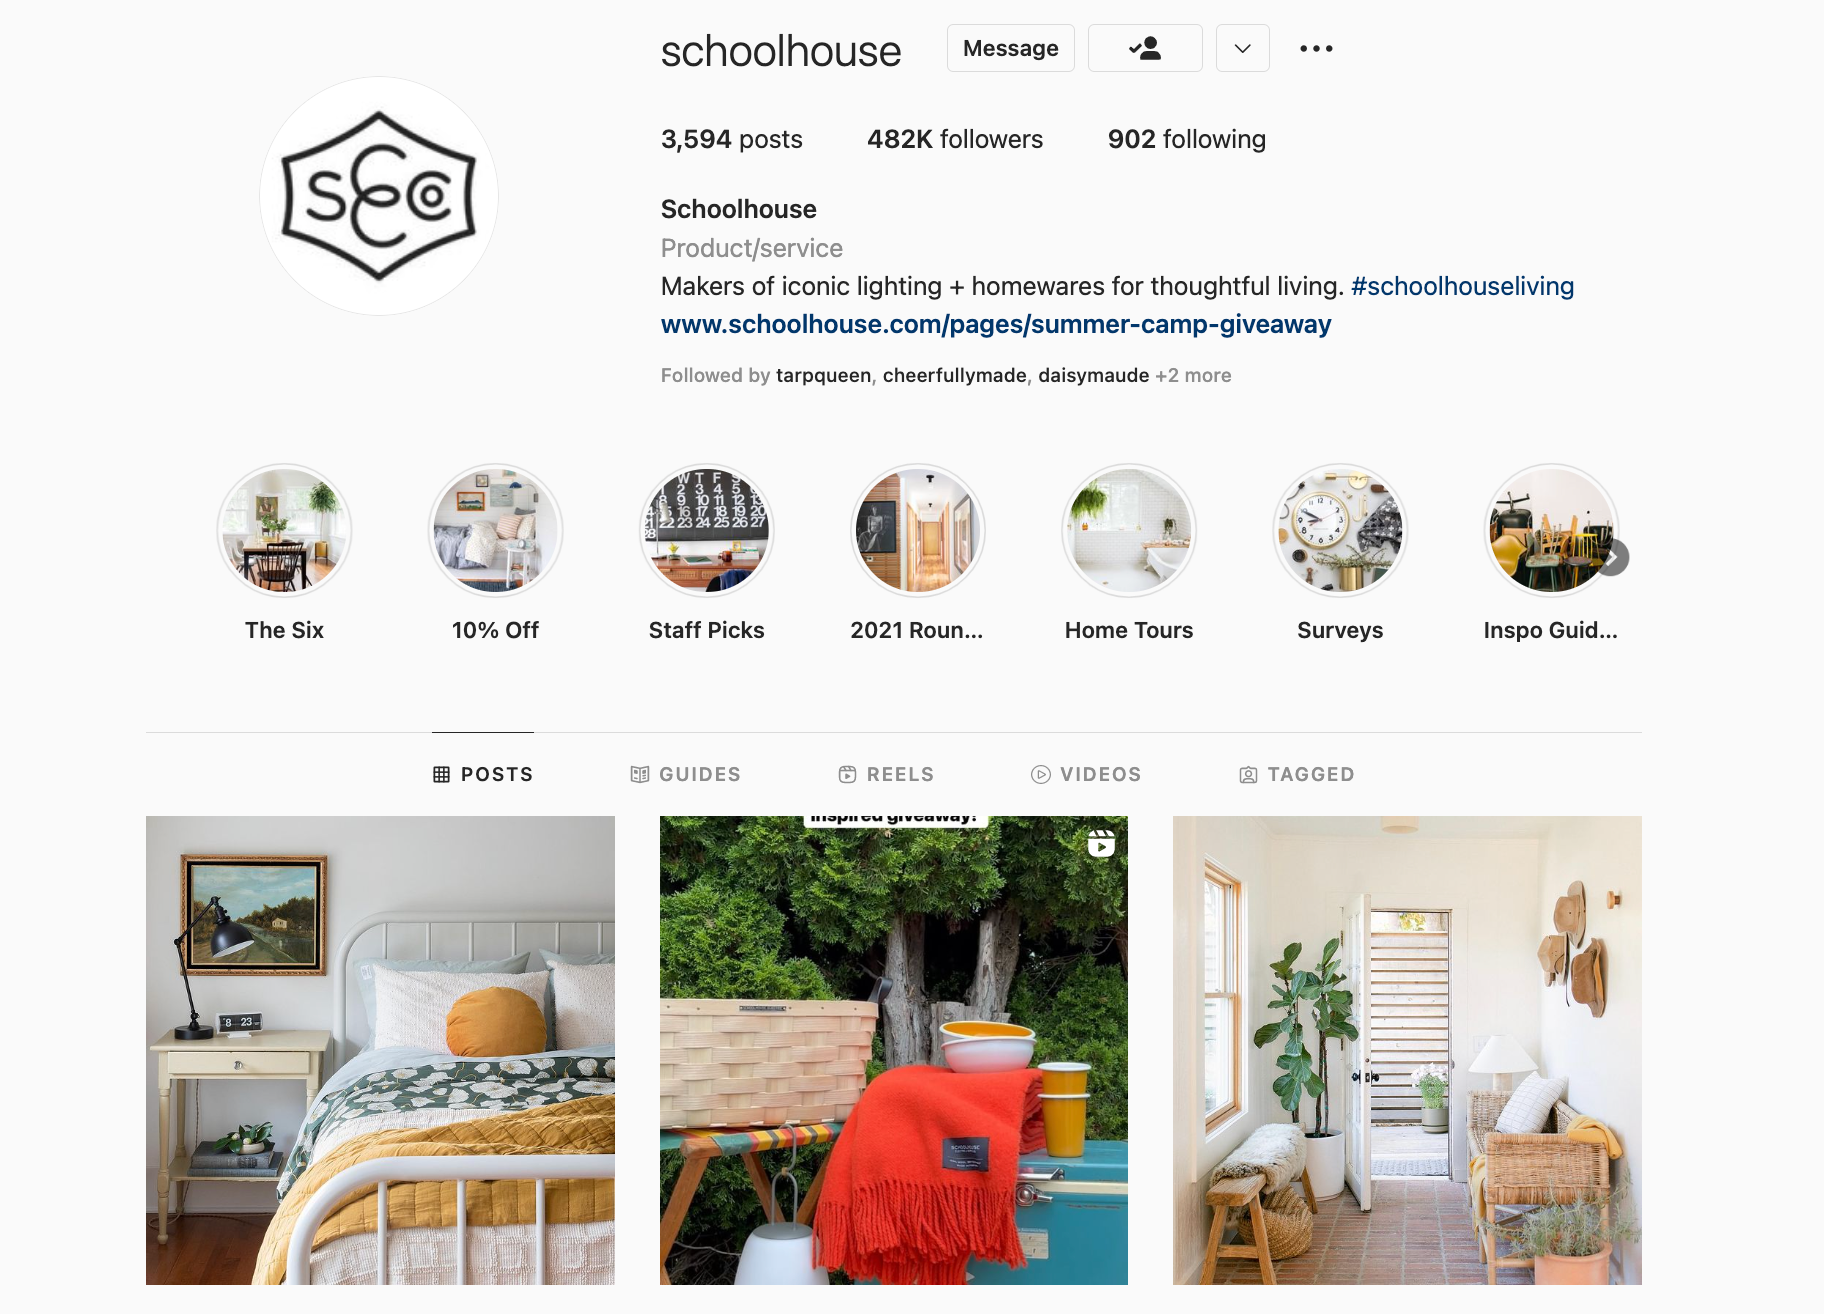 Screengrab of an Instagram profile page for Schoolhouse